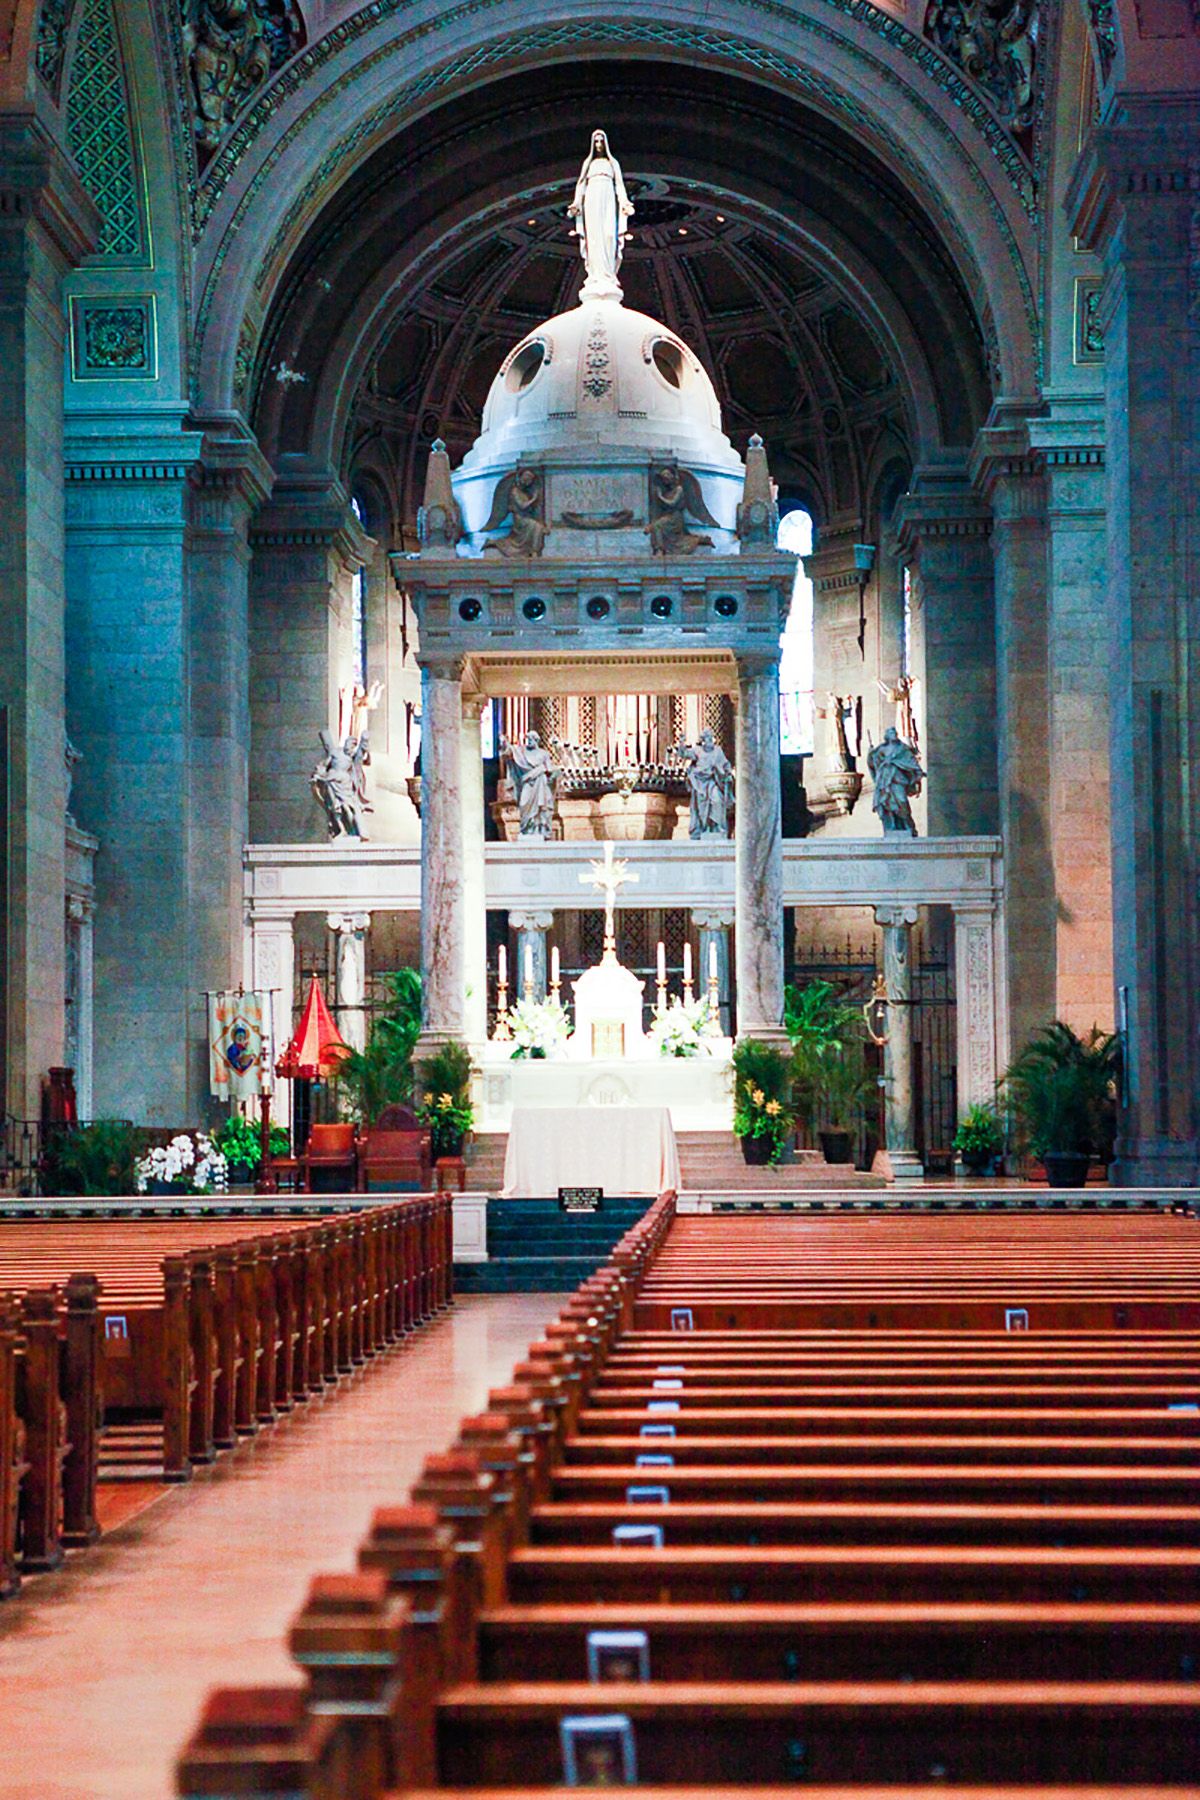 The Basilica of St. Mary